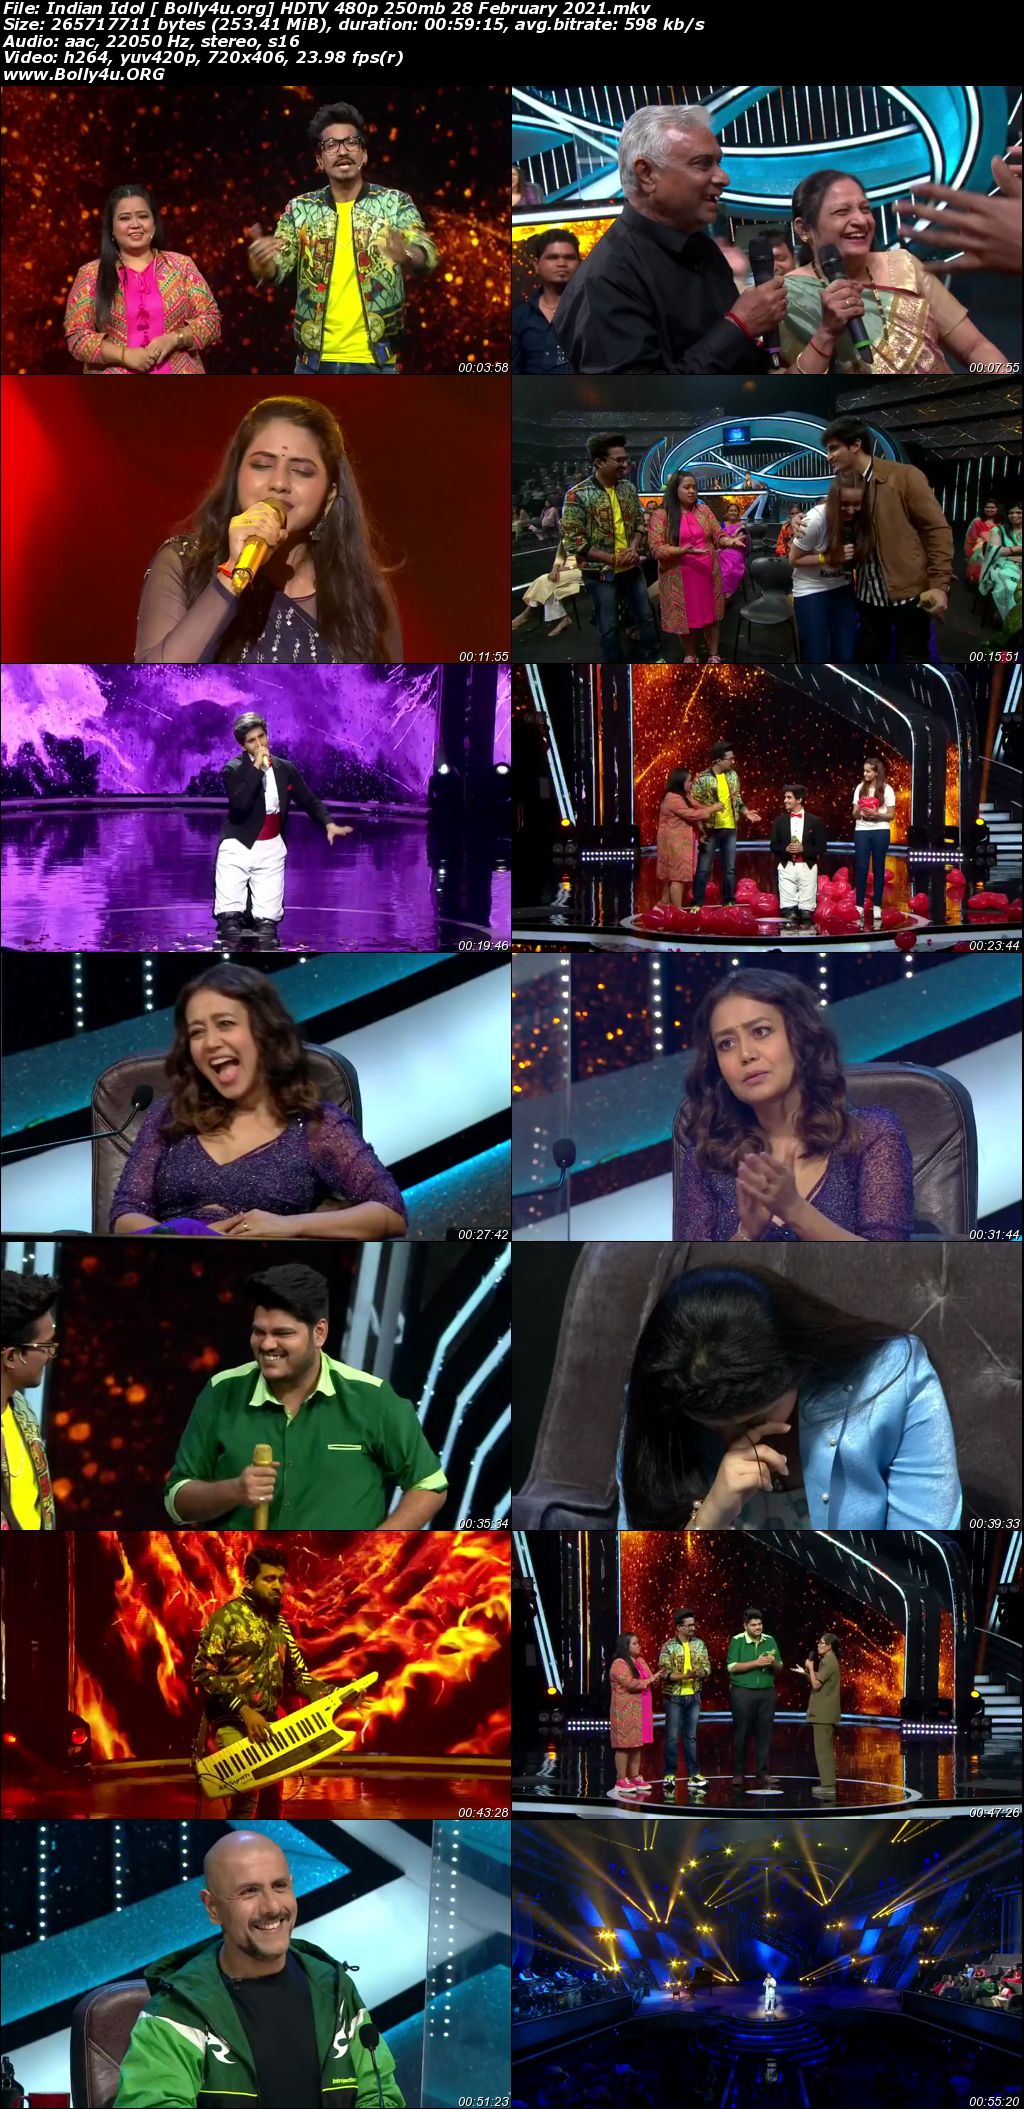 Indian Idol 2021 HDTV 480p 250mb 28 February 2021 Download